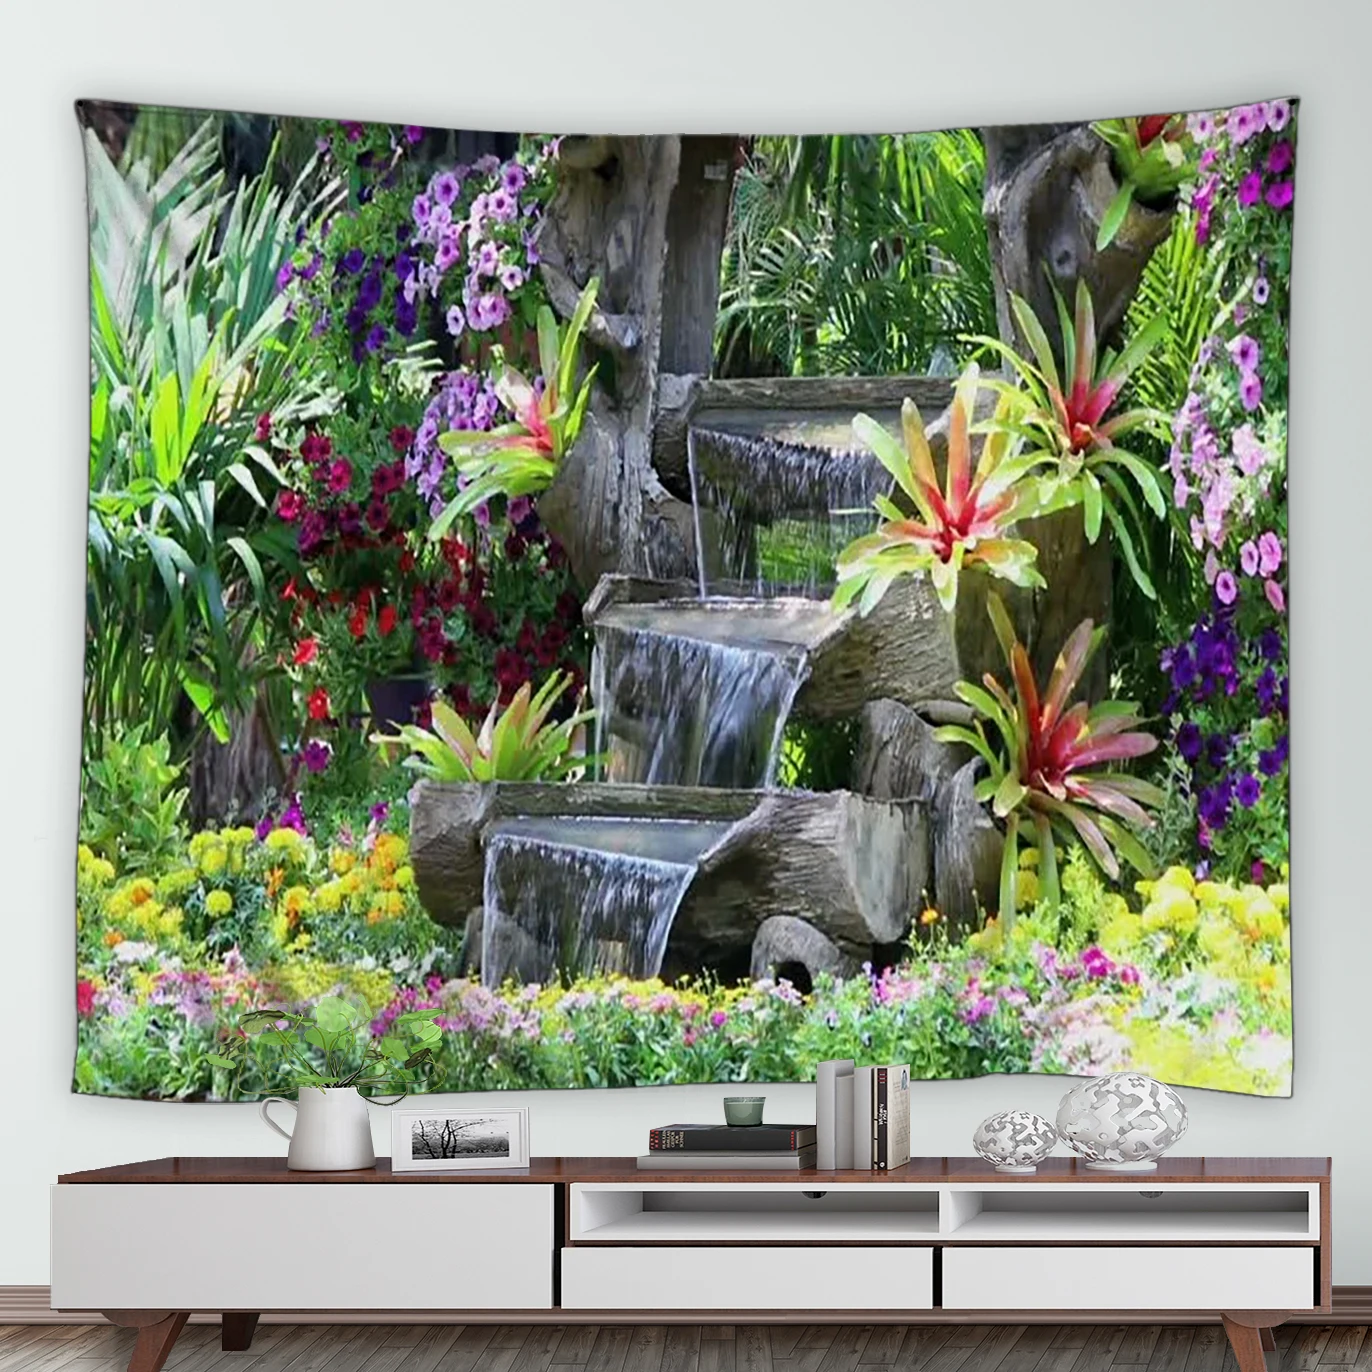 

Tropical Garden Landscape Tapestry Waterfall Flowers Trees Retro Brick Vines Plant Park Nature Scenery Home Decor Wall Hanging